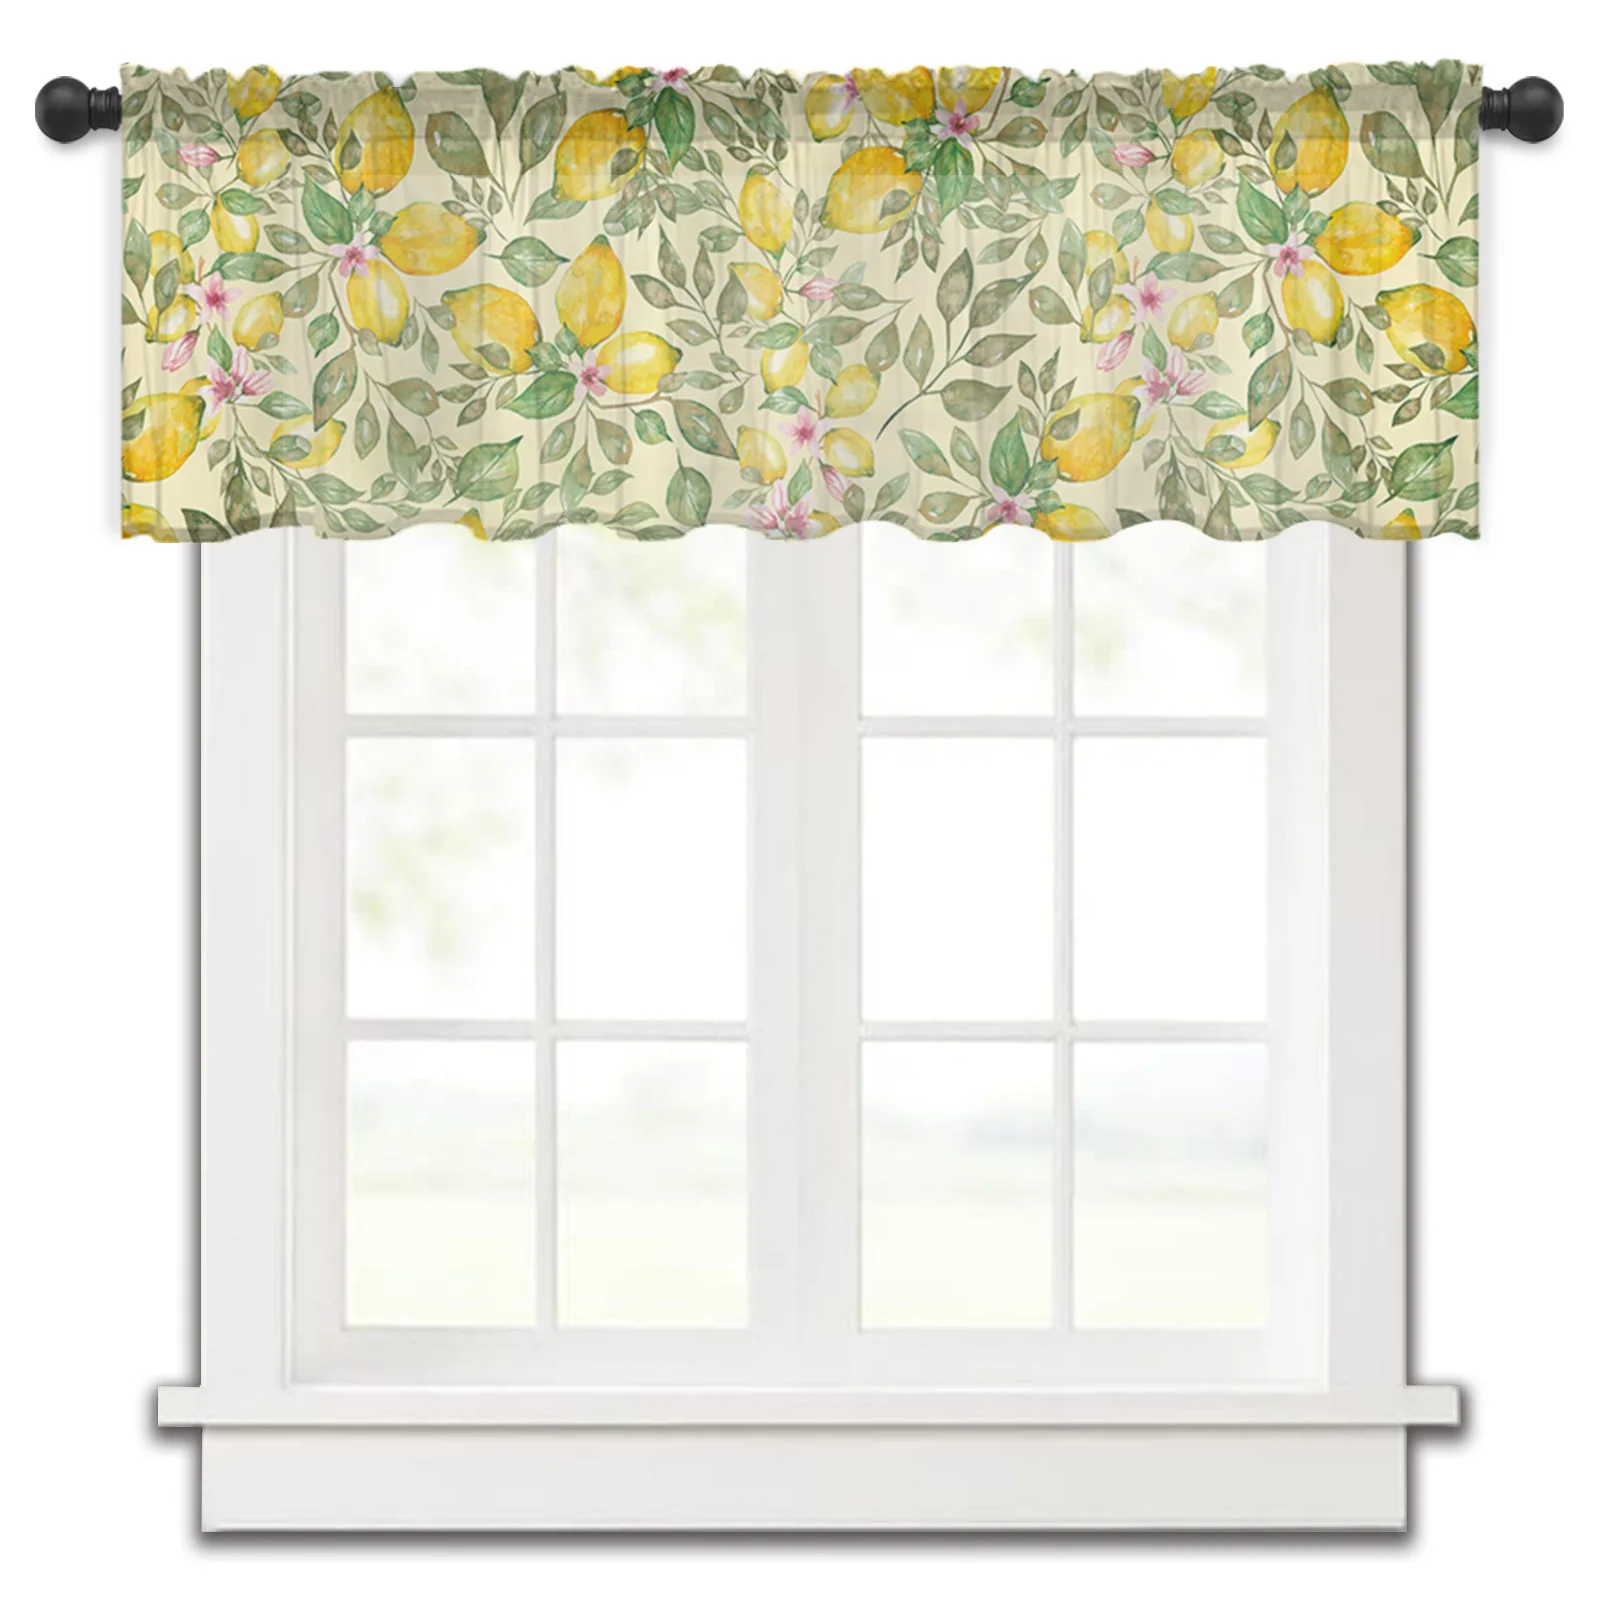 

Watercolor Lemon Flower Kitchen Small Window Curtain Tulle Sheer Short Curtain Bedroom Living Room Home Decor Voile Drapes